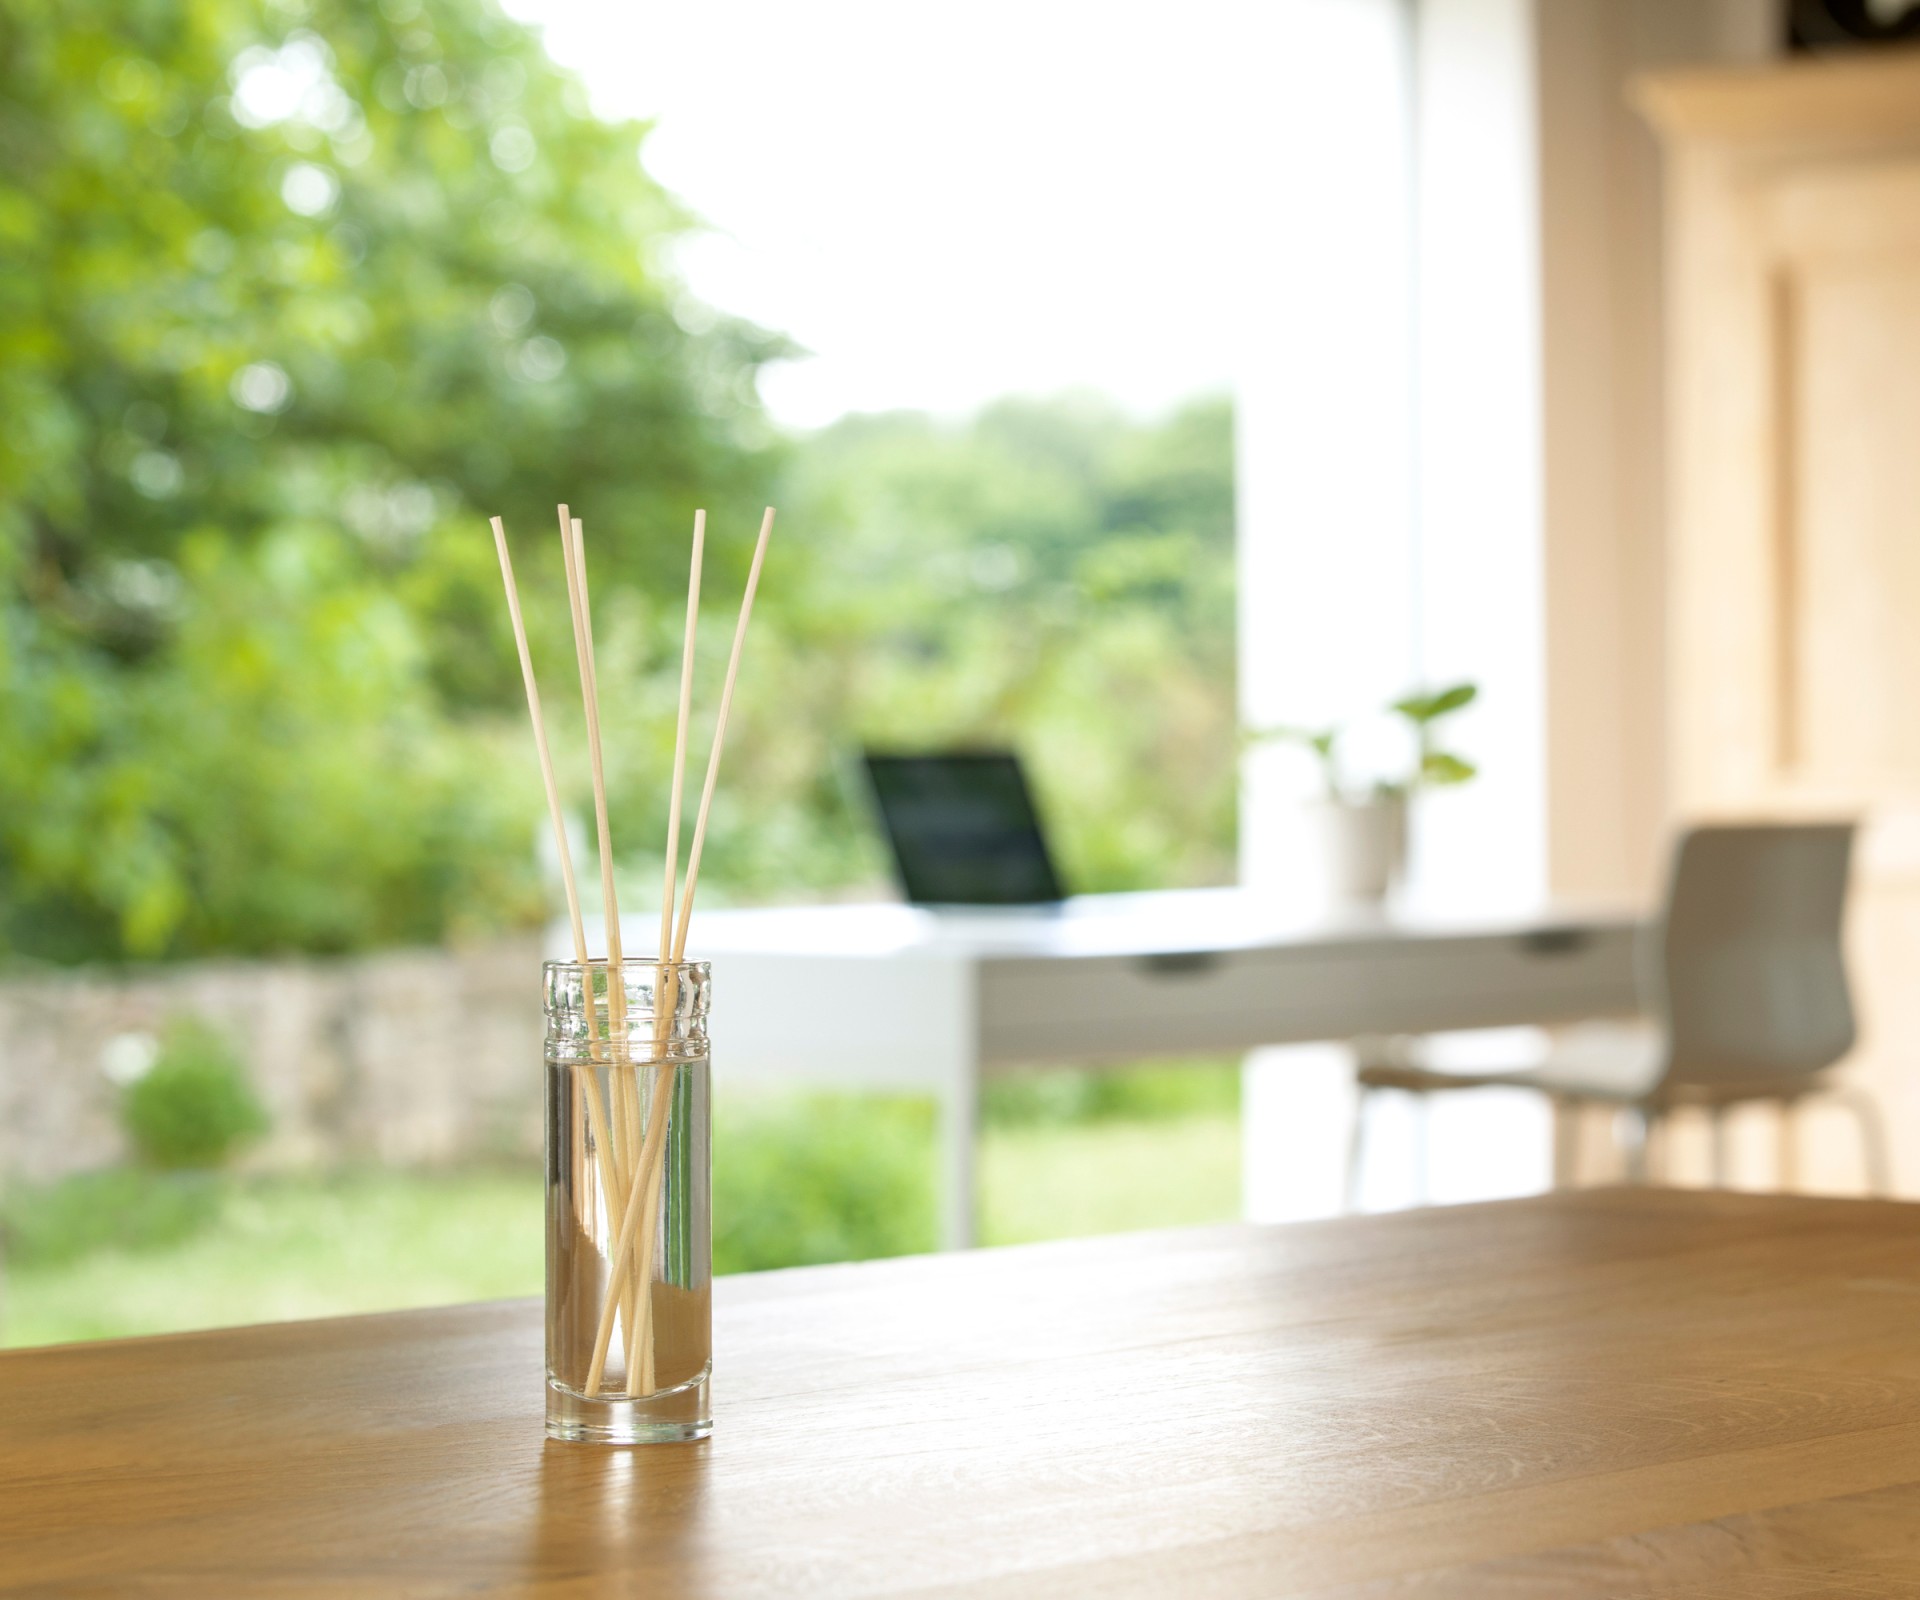 A Frosch Oase room freshener glass bottle with reed diffusers stands on a wooden table